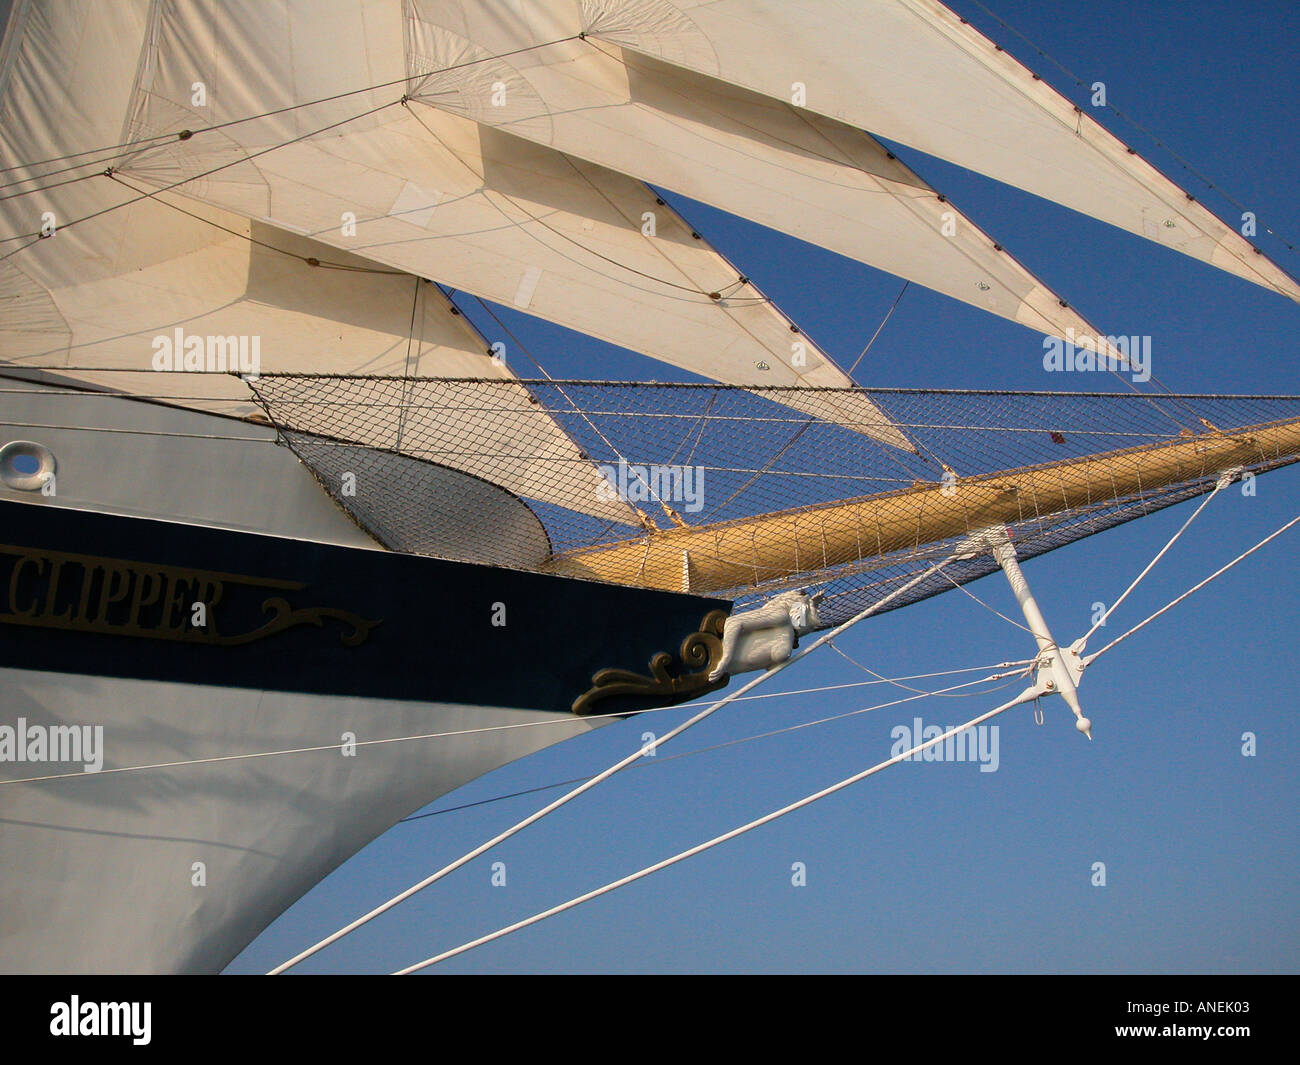 Bow of the five-masted sailing ship Royal Clipper Stock Photo